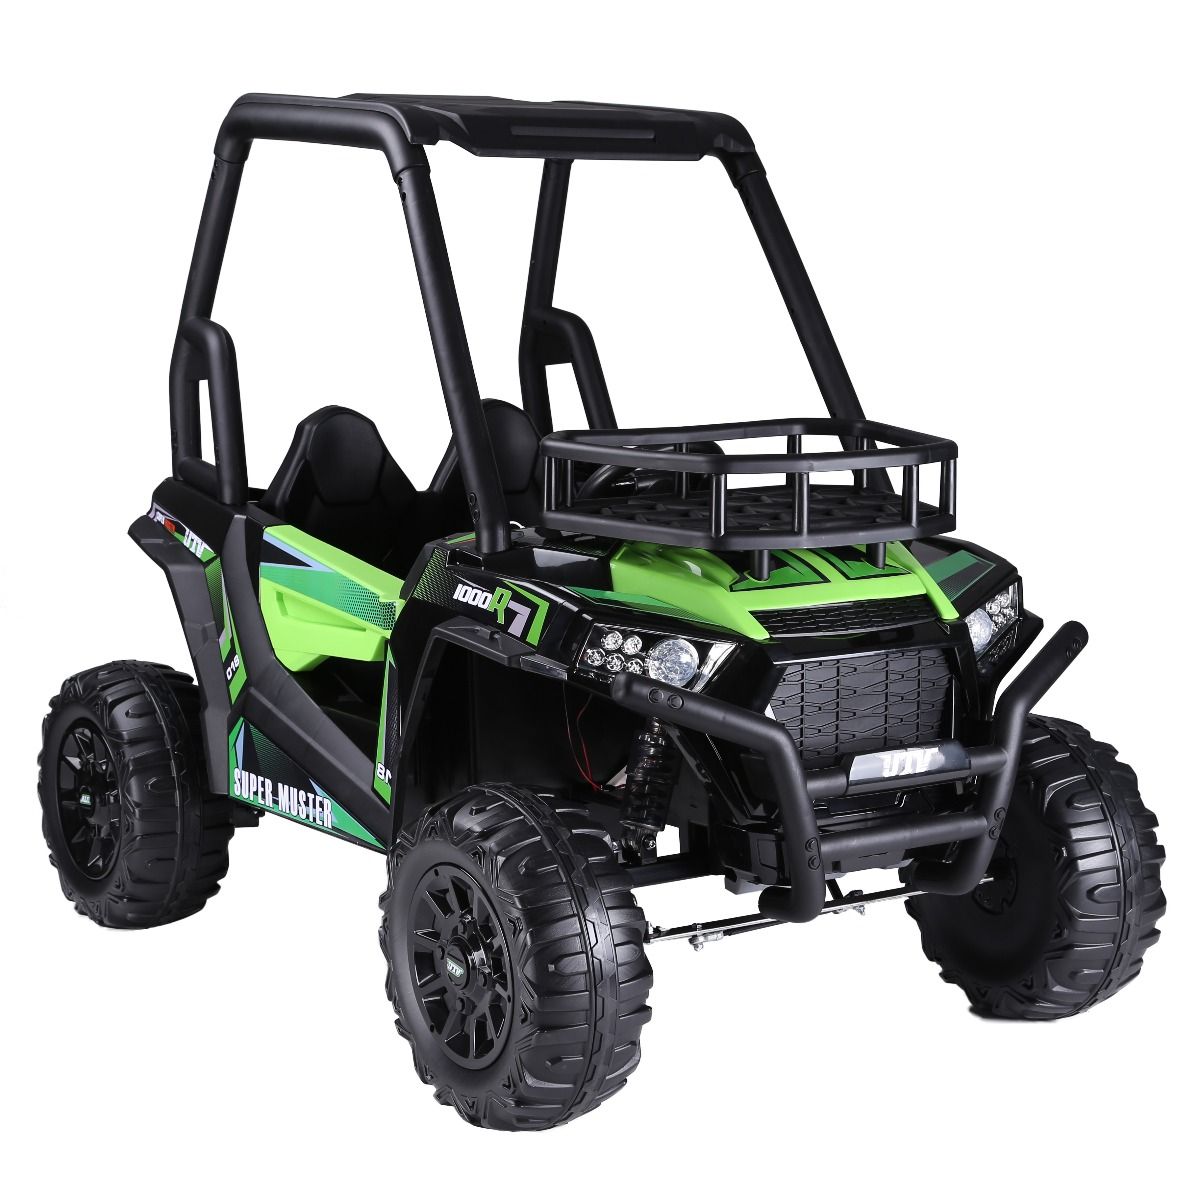 ALL 4 KIDS 24V Beach Buggy Electric Ride On Toy - Green